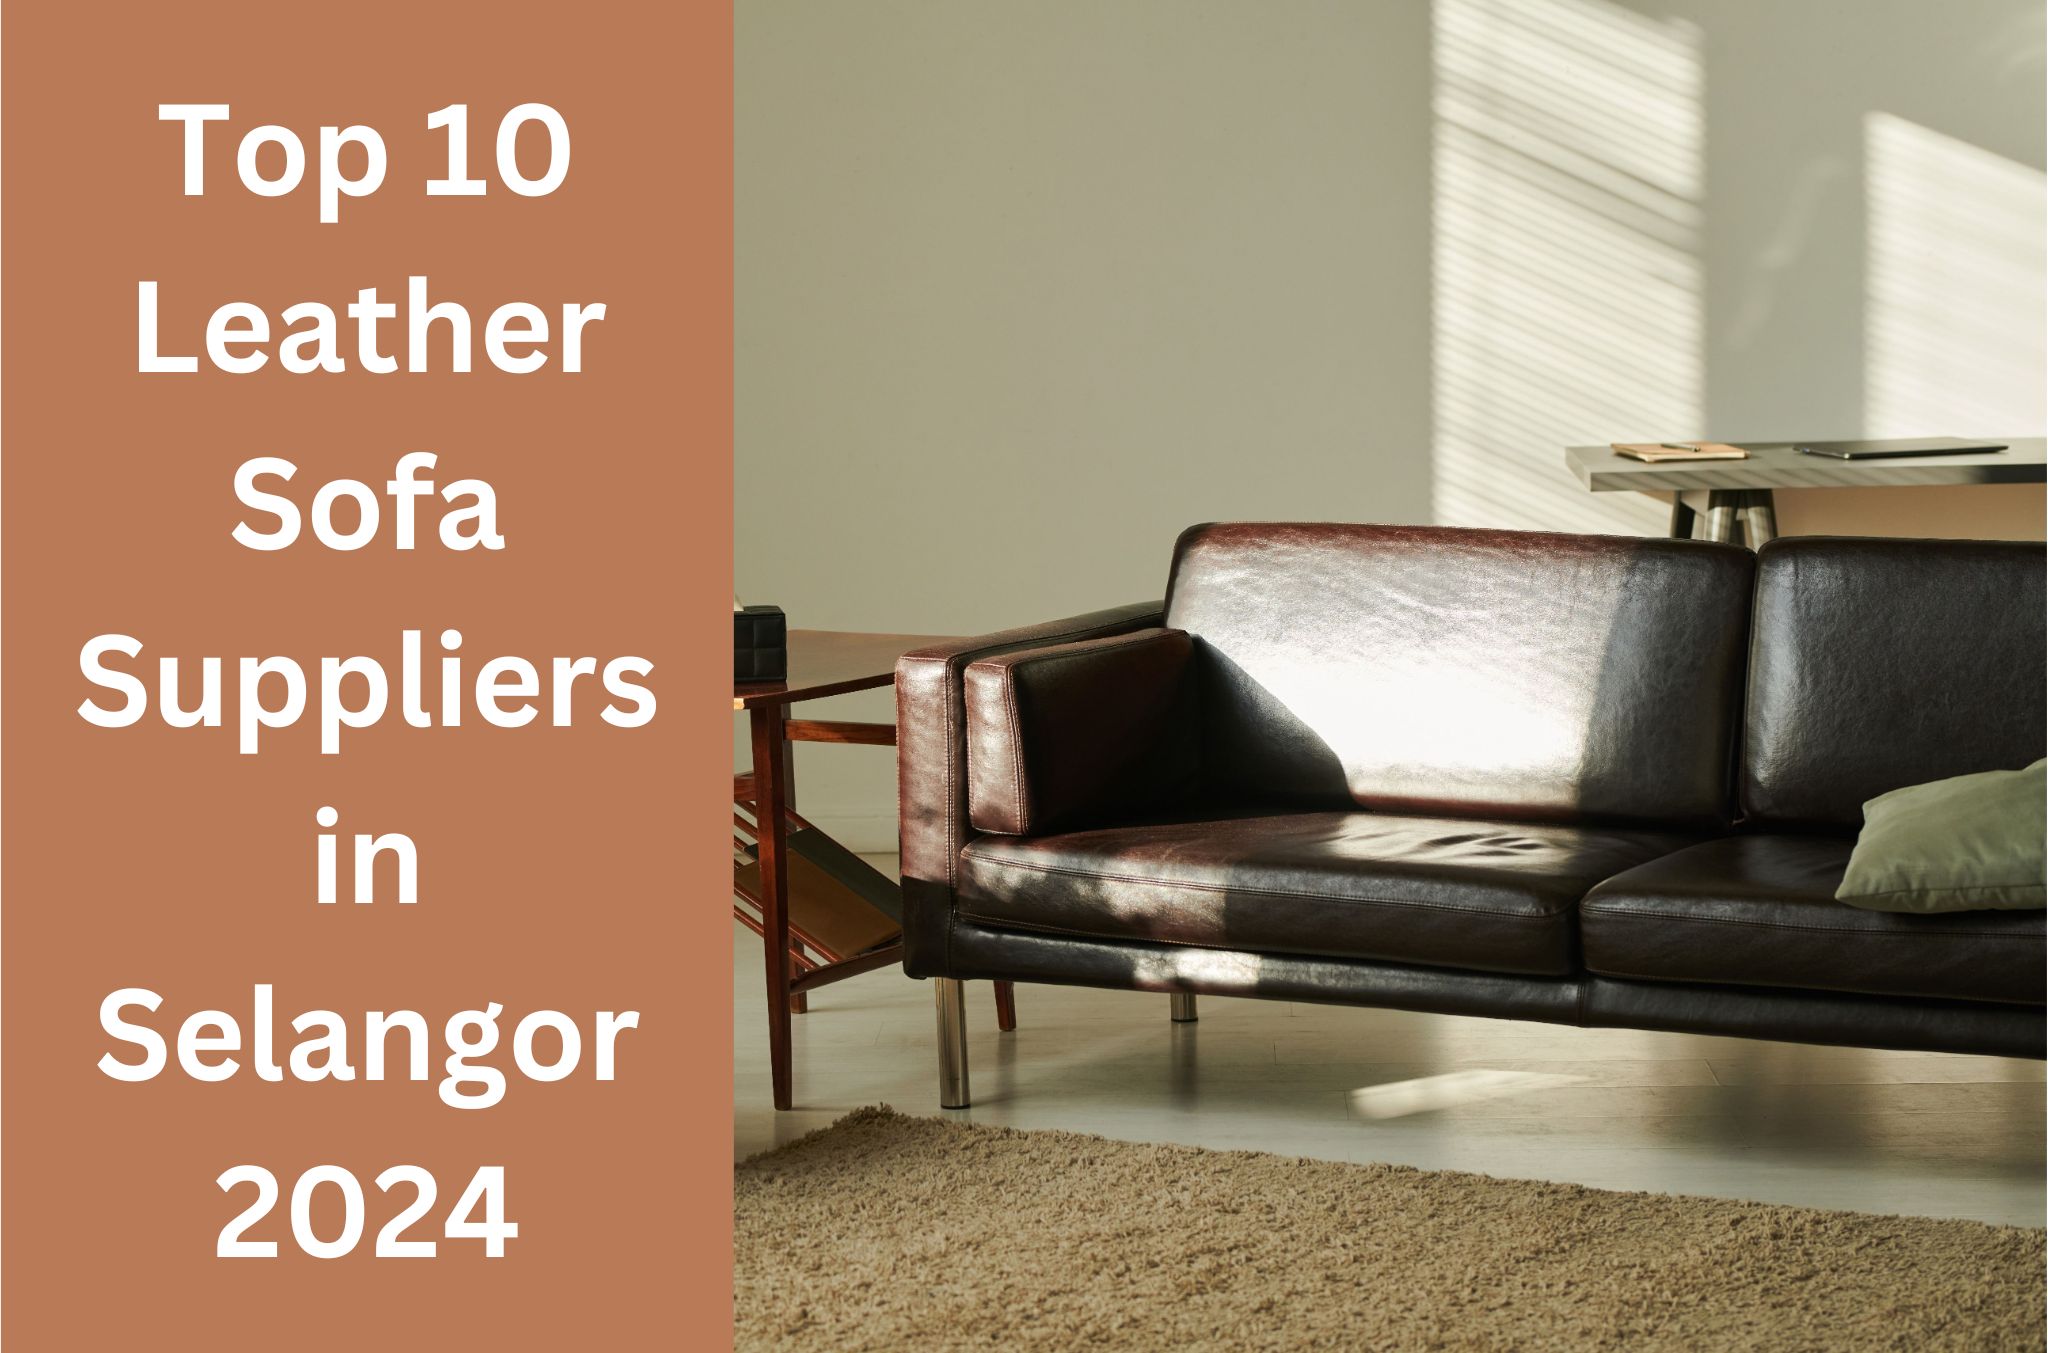 Top 10 Leather Sofa Suppliers in Selangor 2024